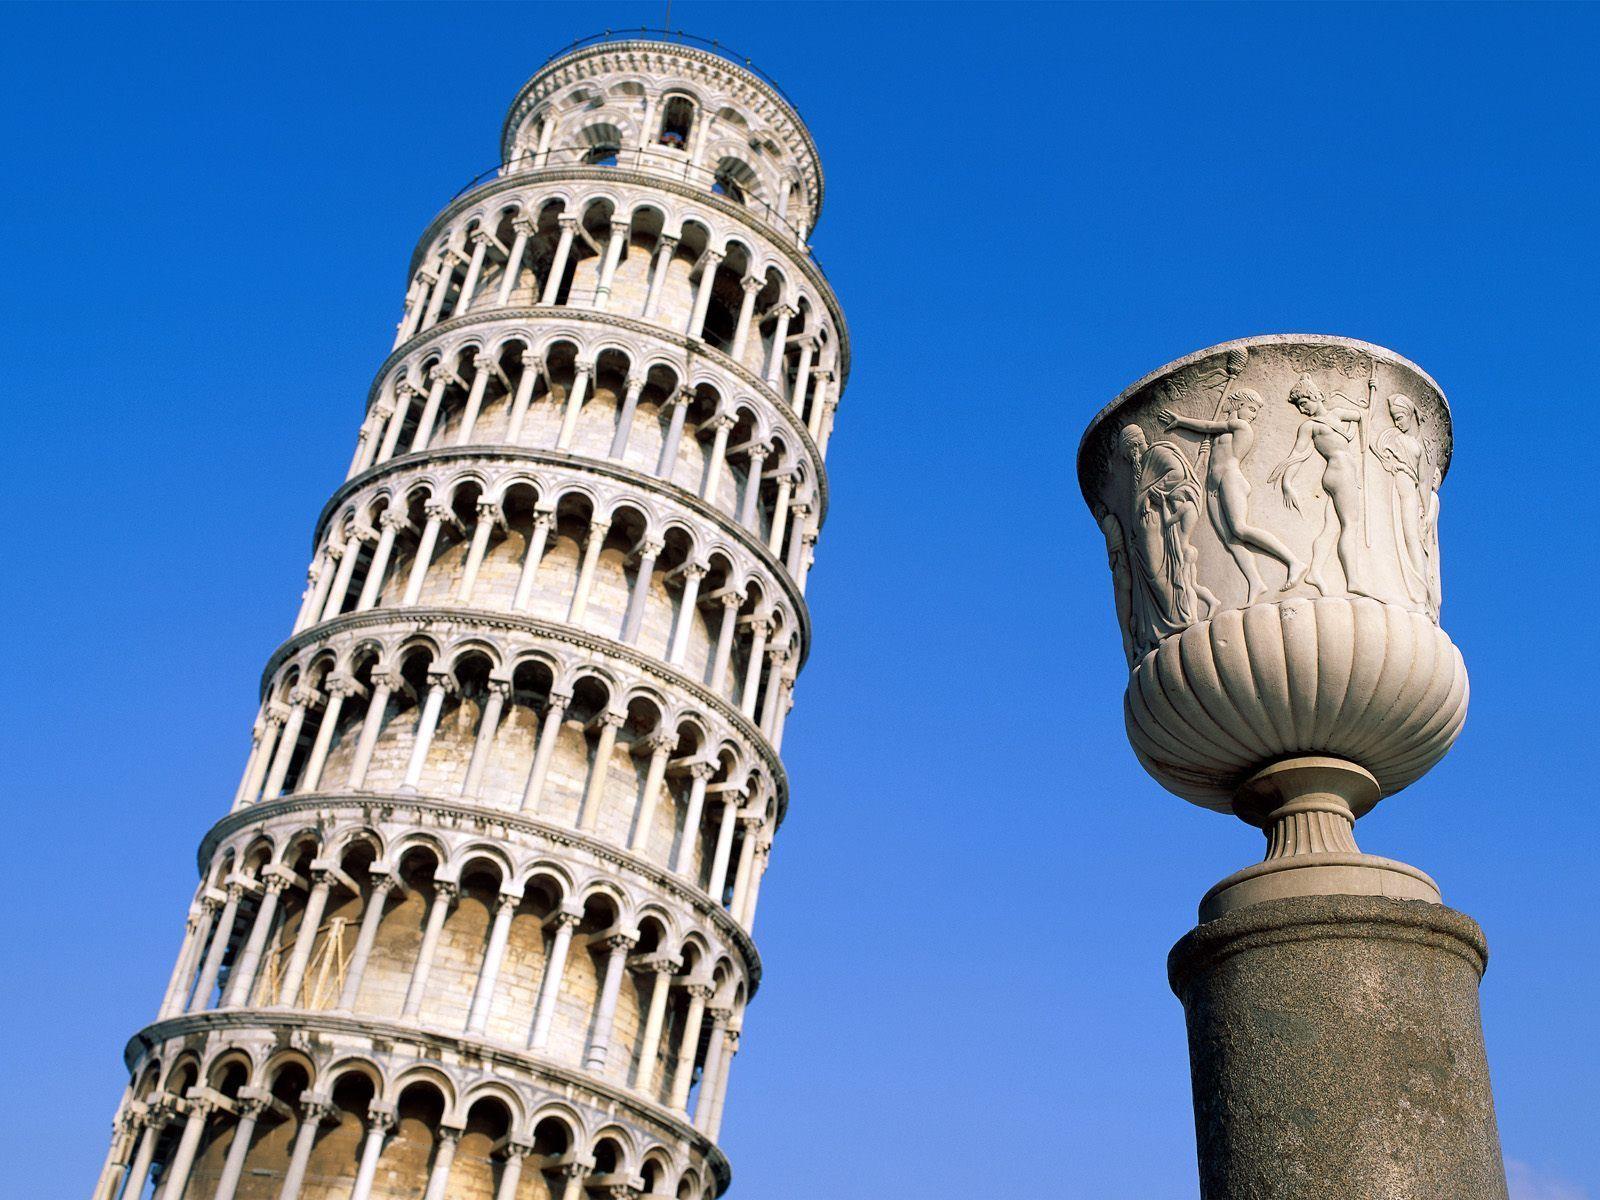 Leaning Tower Pisa Italy Wallpaper